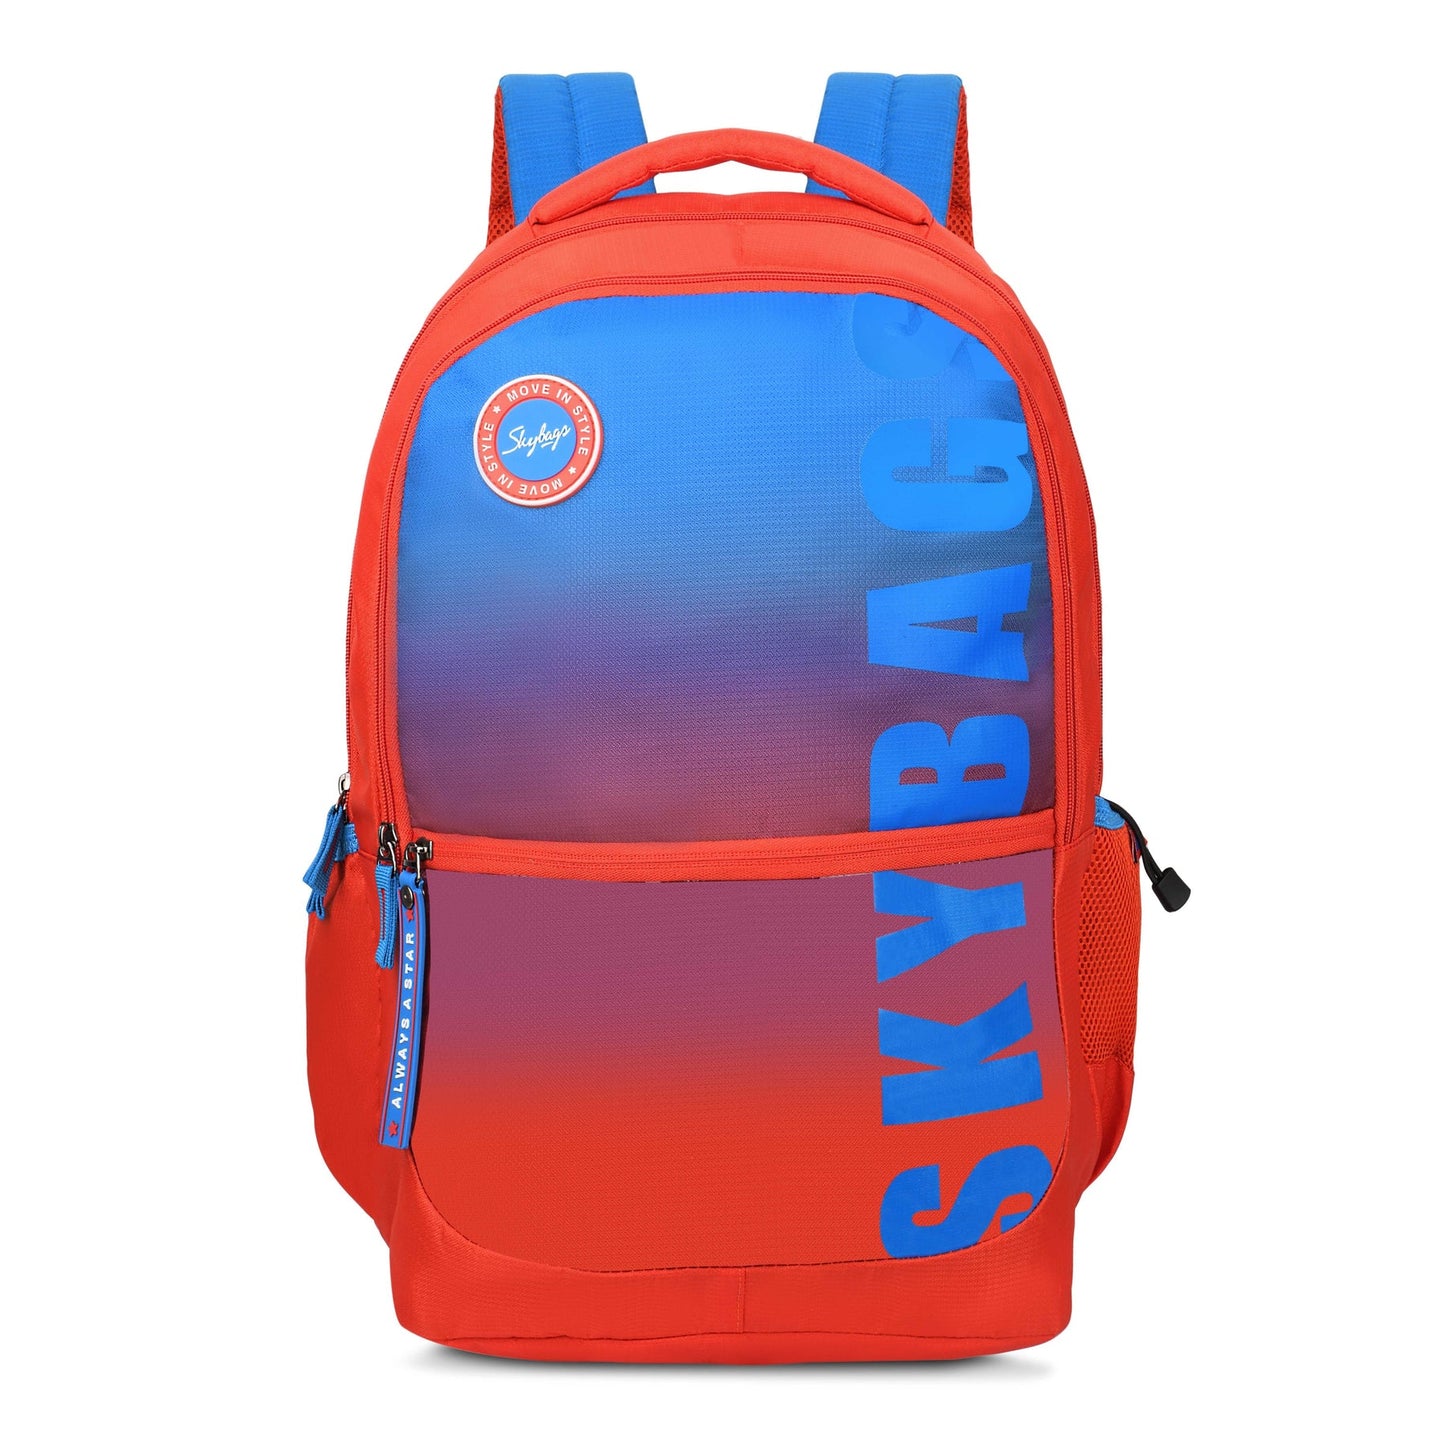 Skybags Squad Plus 03 38L Backpack